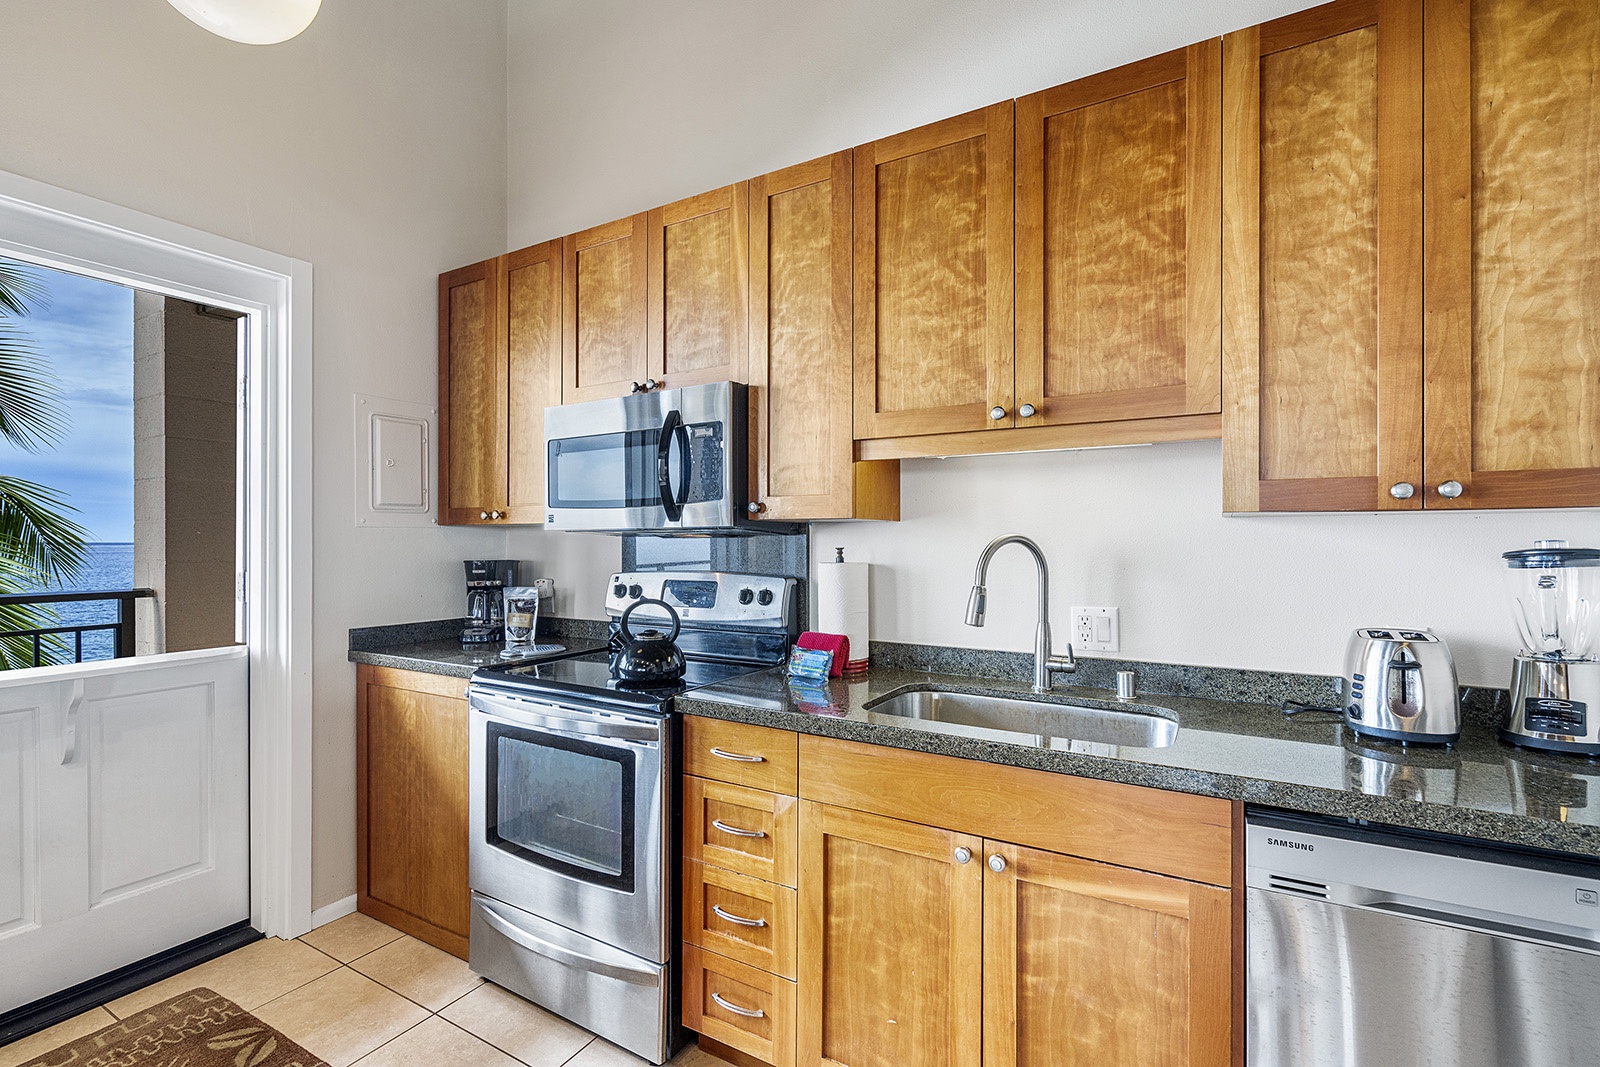 Kailua Kona Vacation Rentals, Kona Makai 6301 - Fully equipped kitchen with all the essentials you could need!